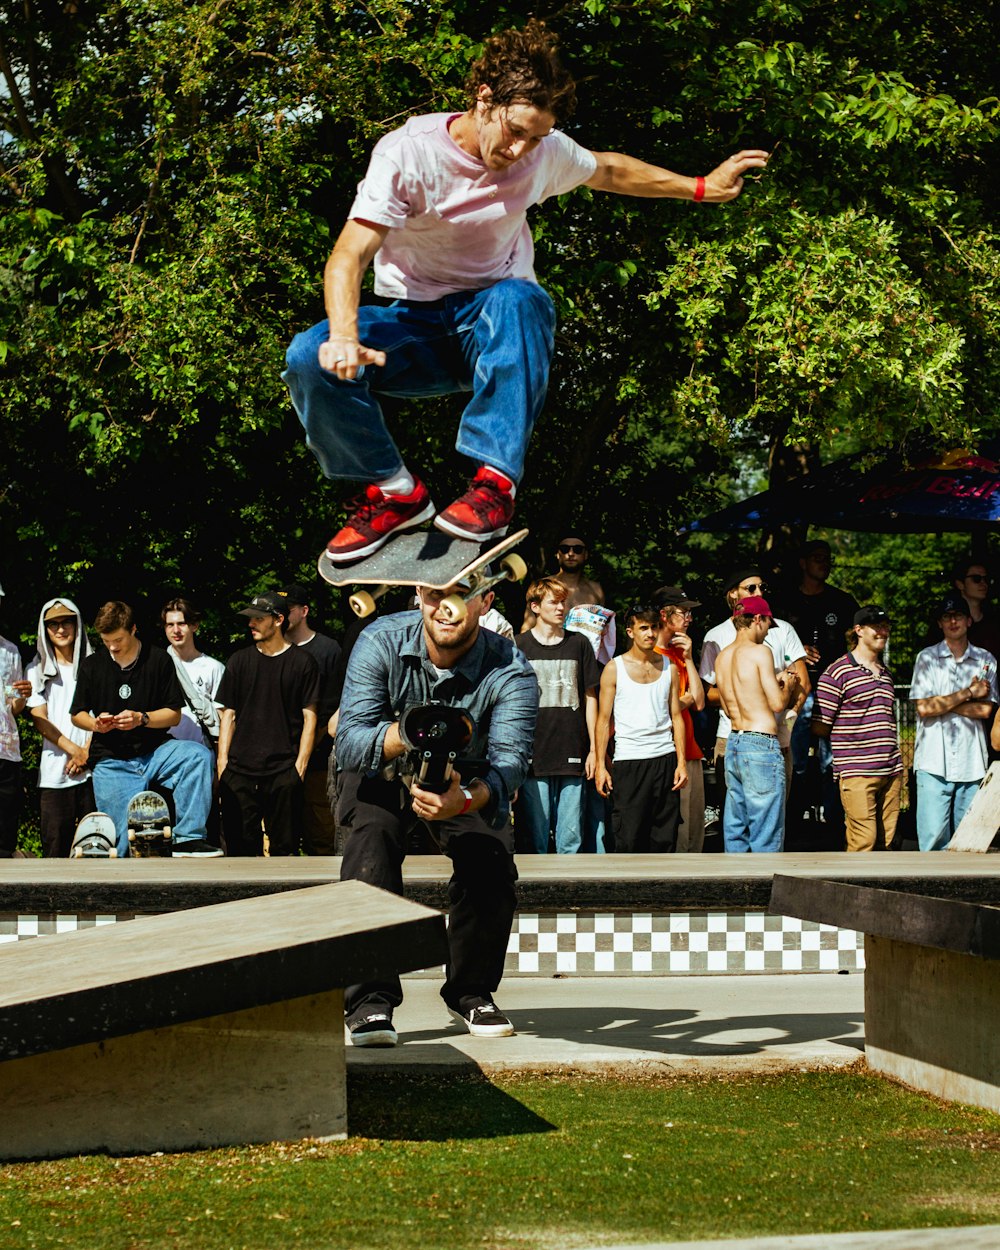 a man jumping in the air with a skateboard